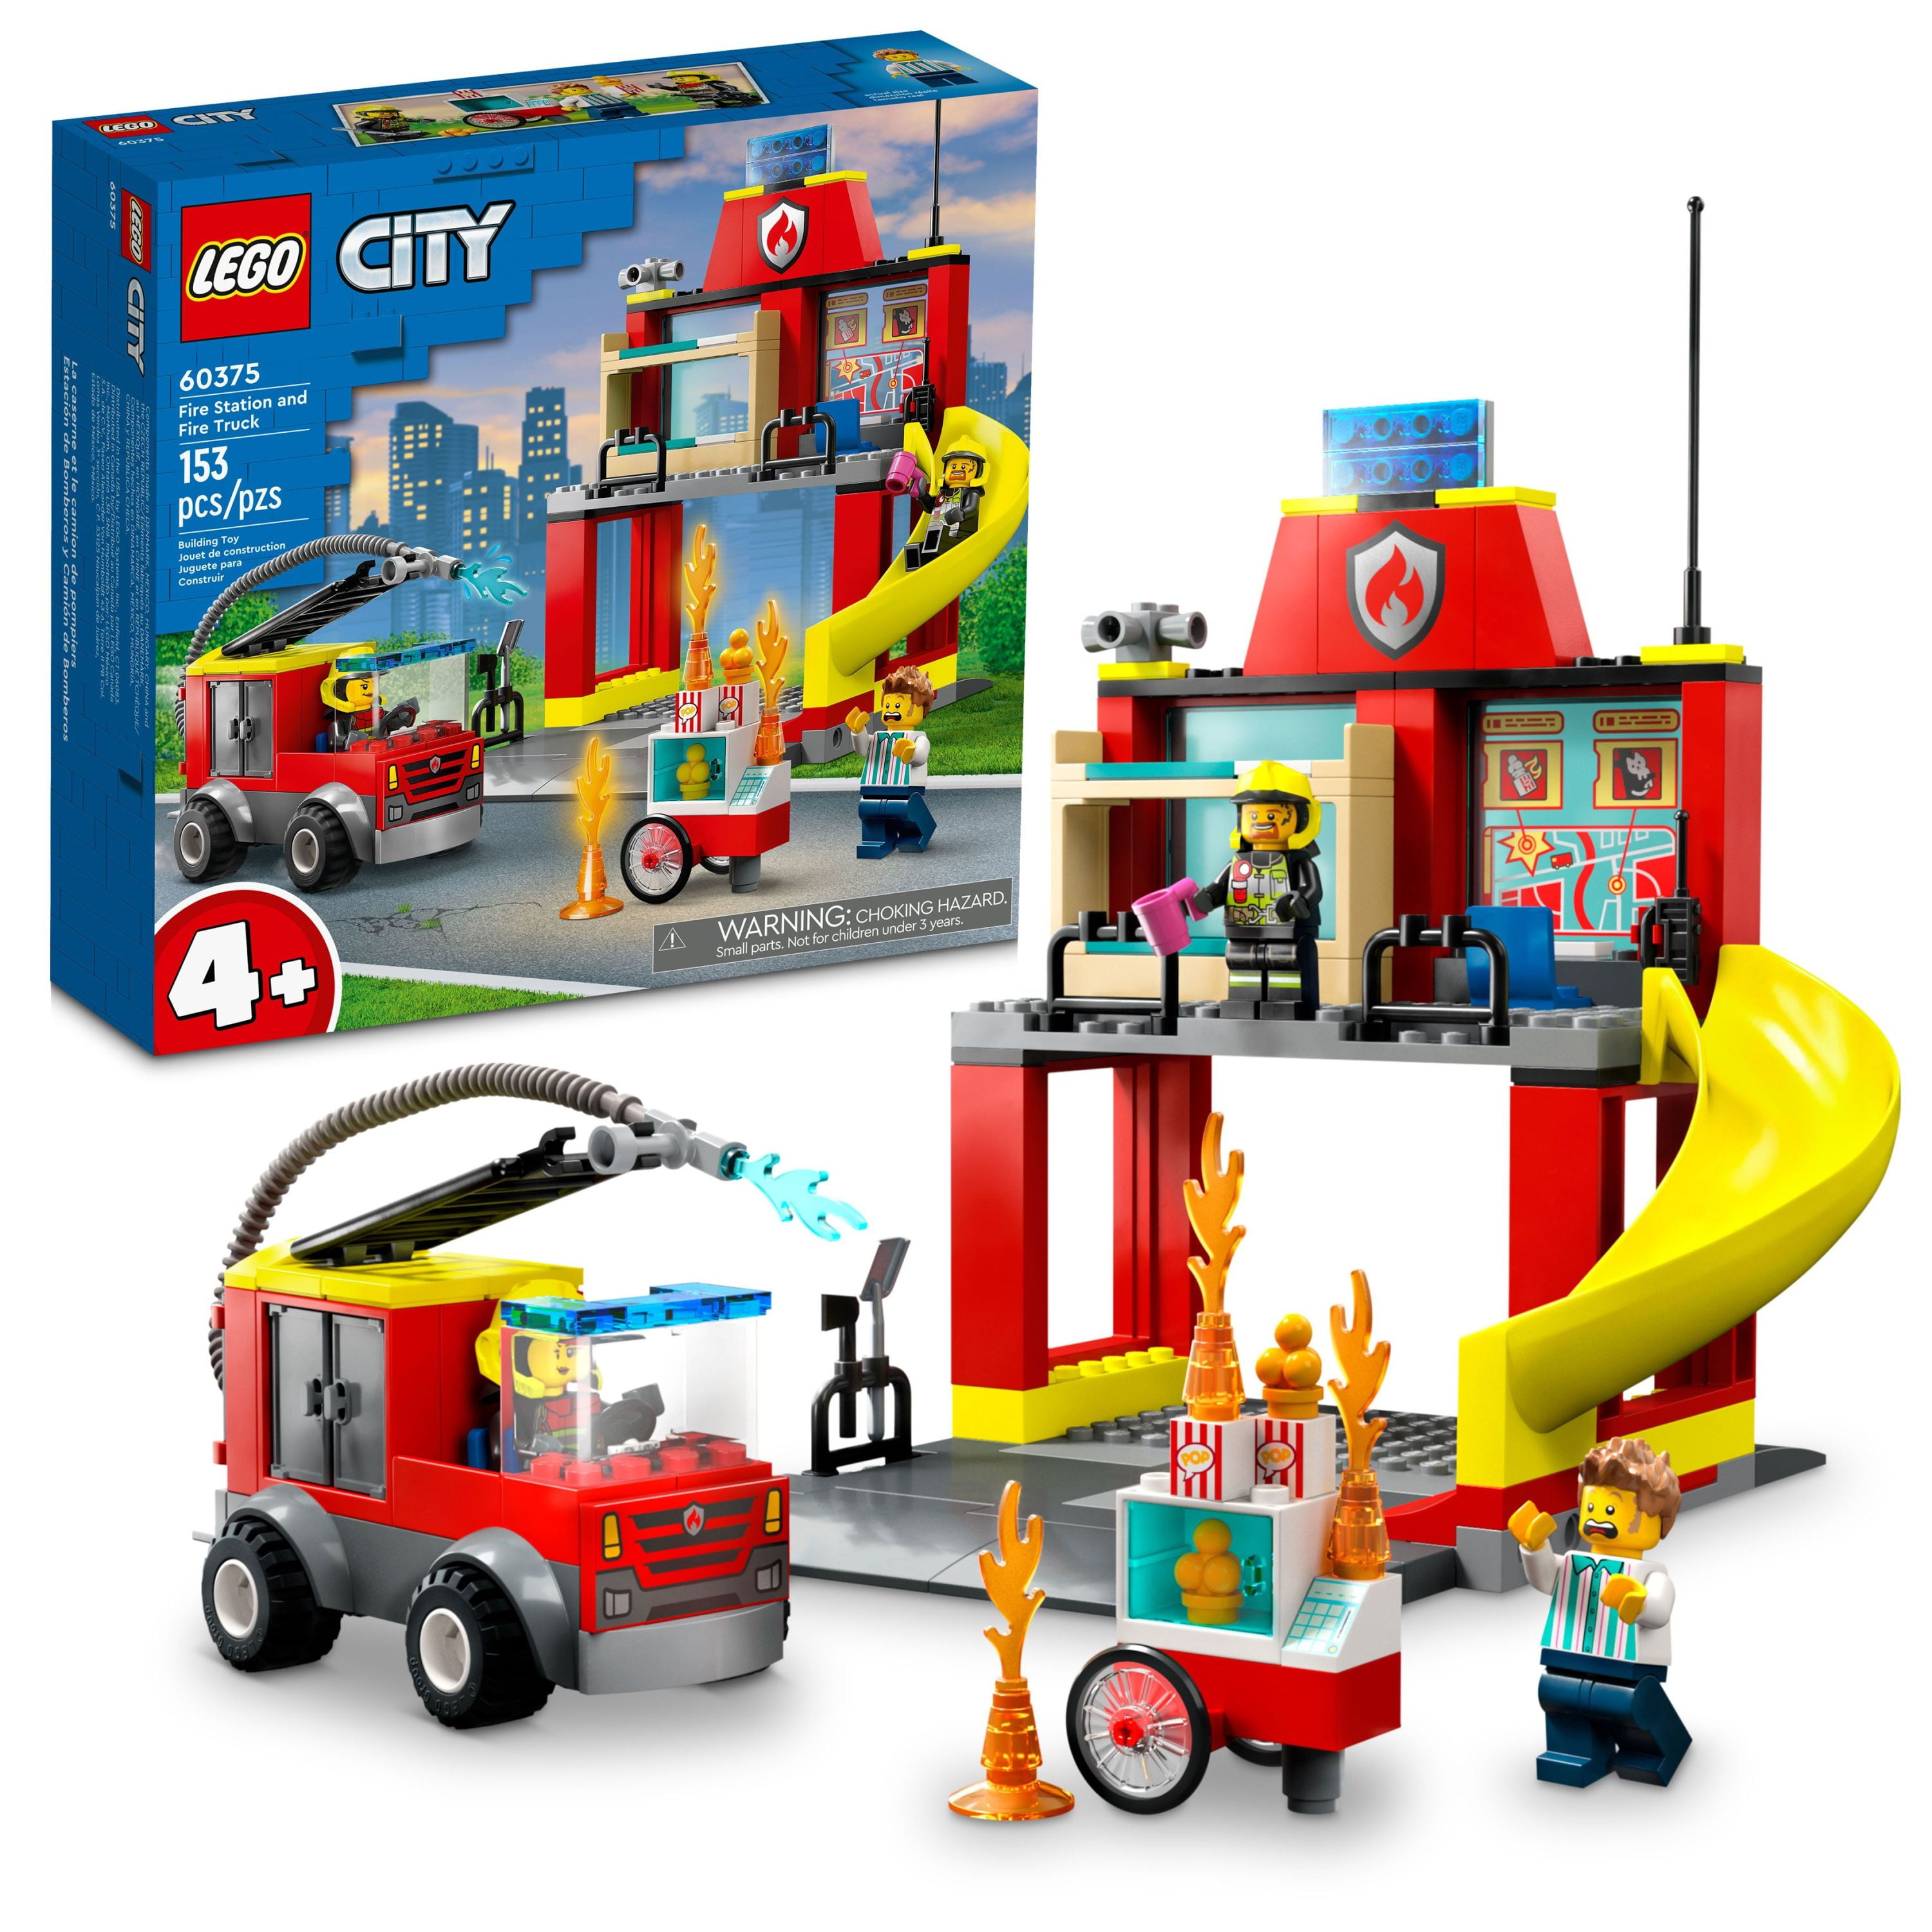 Ubarmhjertig dans Først LEGO City Fire Station and Fire Engine 60375, Pretend Play Fire Station  with Firefighter Minifigures, Educational Vehicle Toys for Kids Boys Girls  Age 4+ - Walmart.com